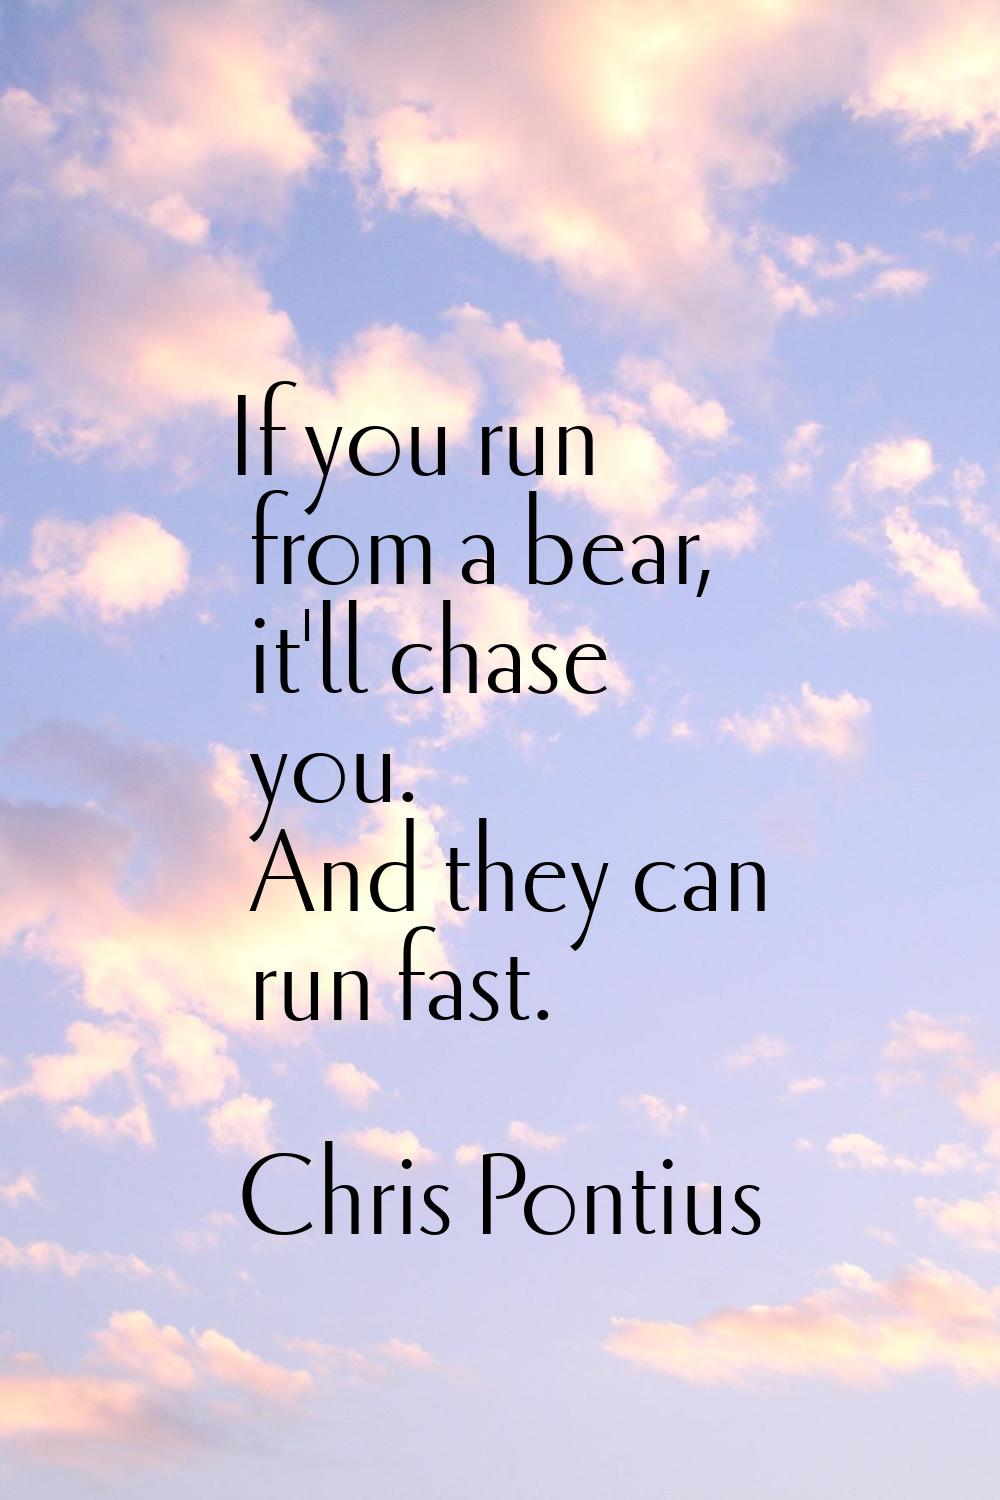 If you run from a bear, it'll chase you. And they can run fast.